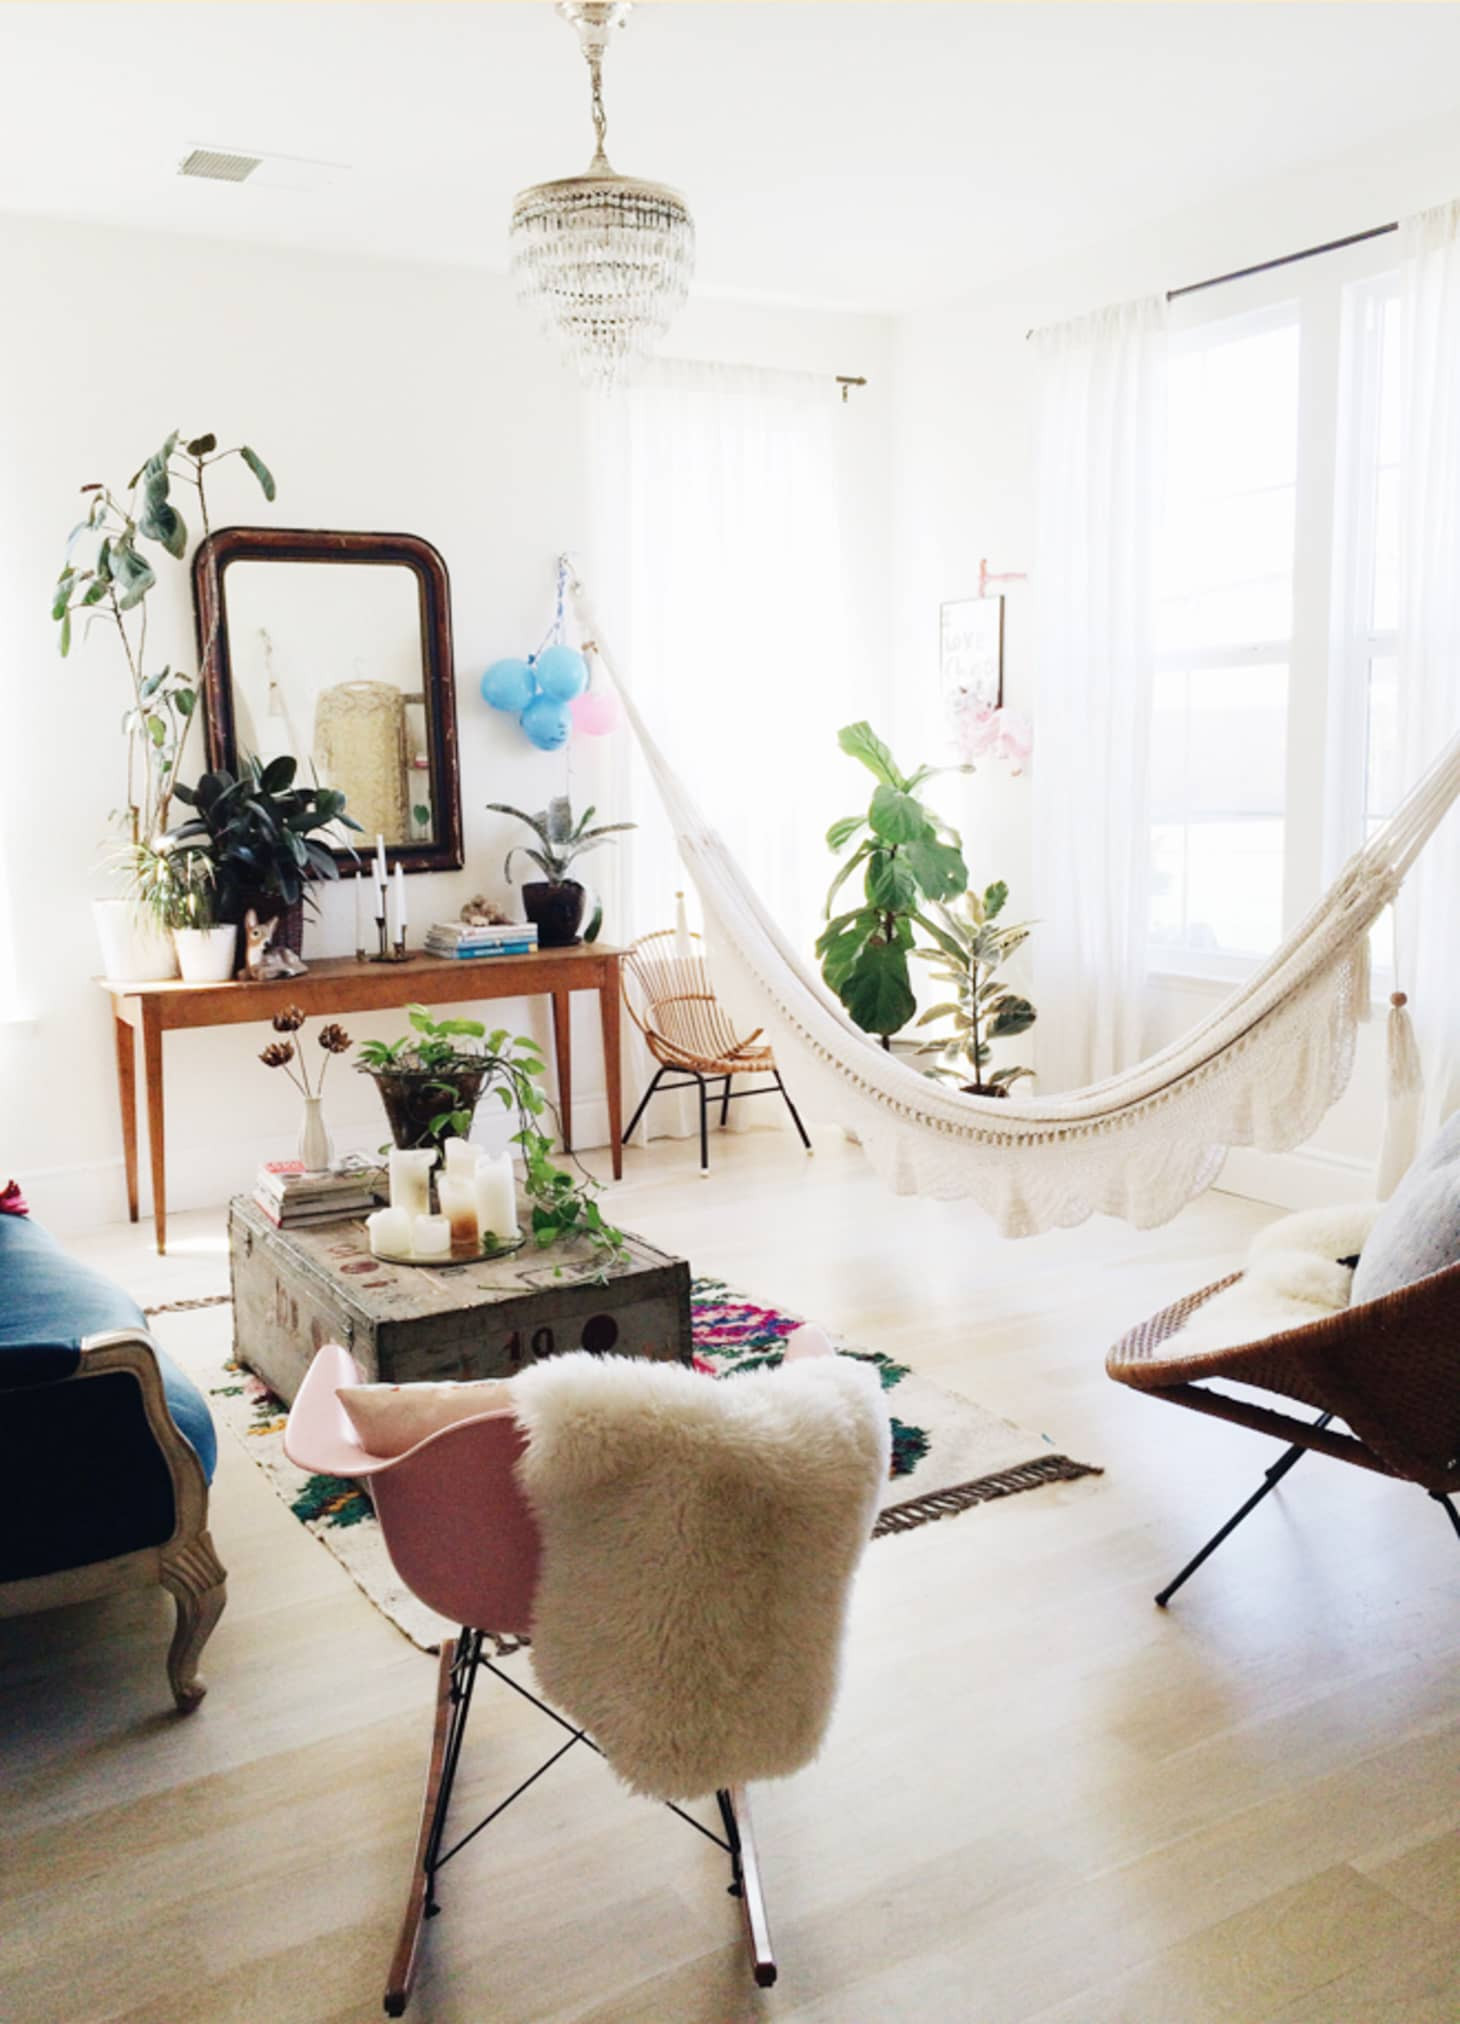 Hanging Chair Living Room
 Bring the Outdoors In Living Room Hammocks & Hanging